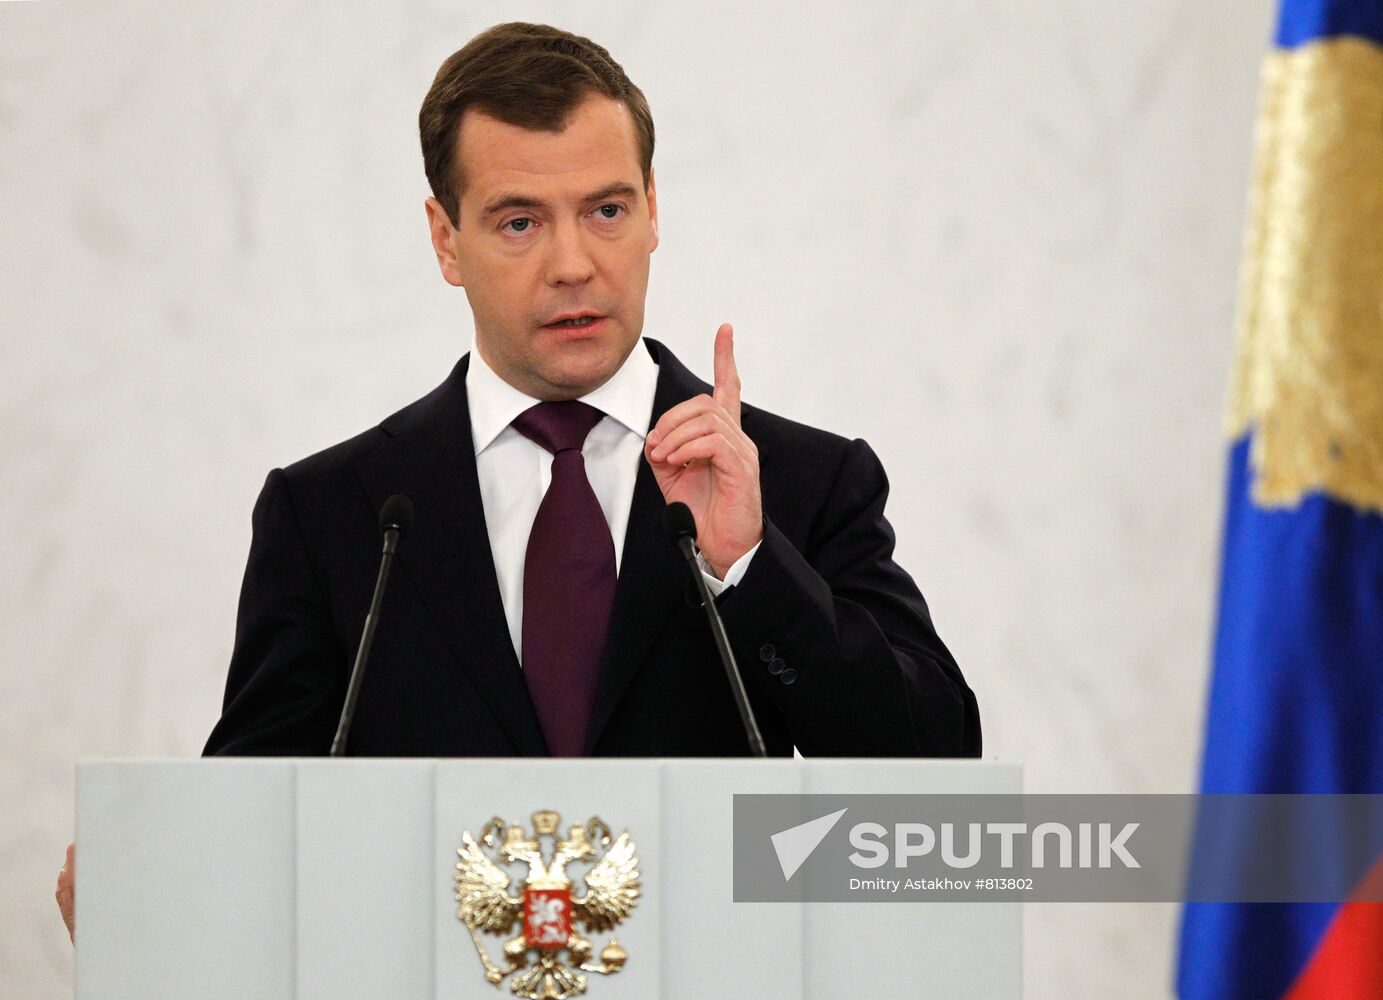 Dmitry Medvedev's annual address to Federal Assembly